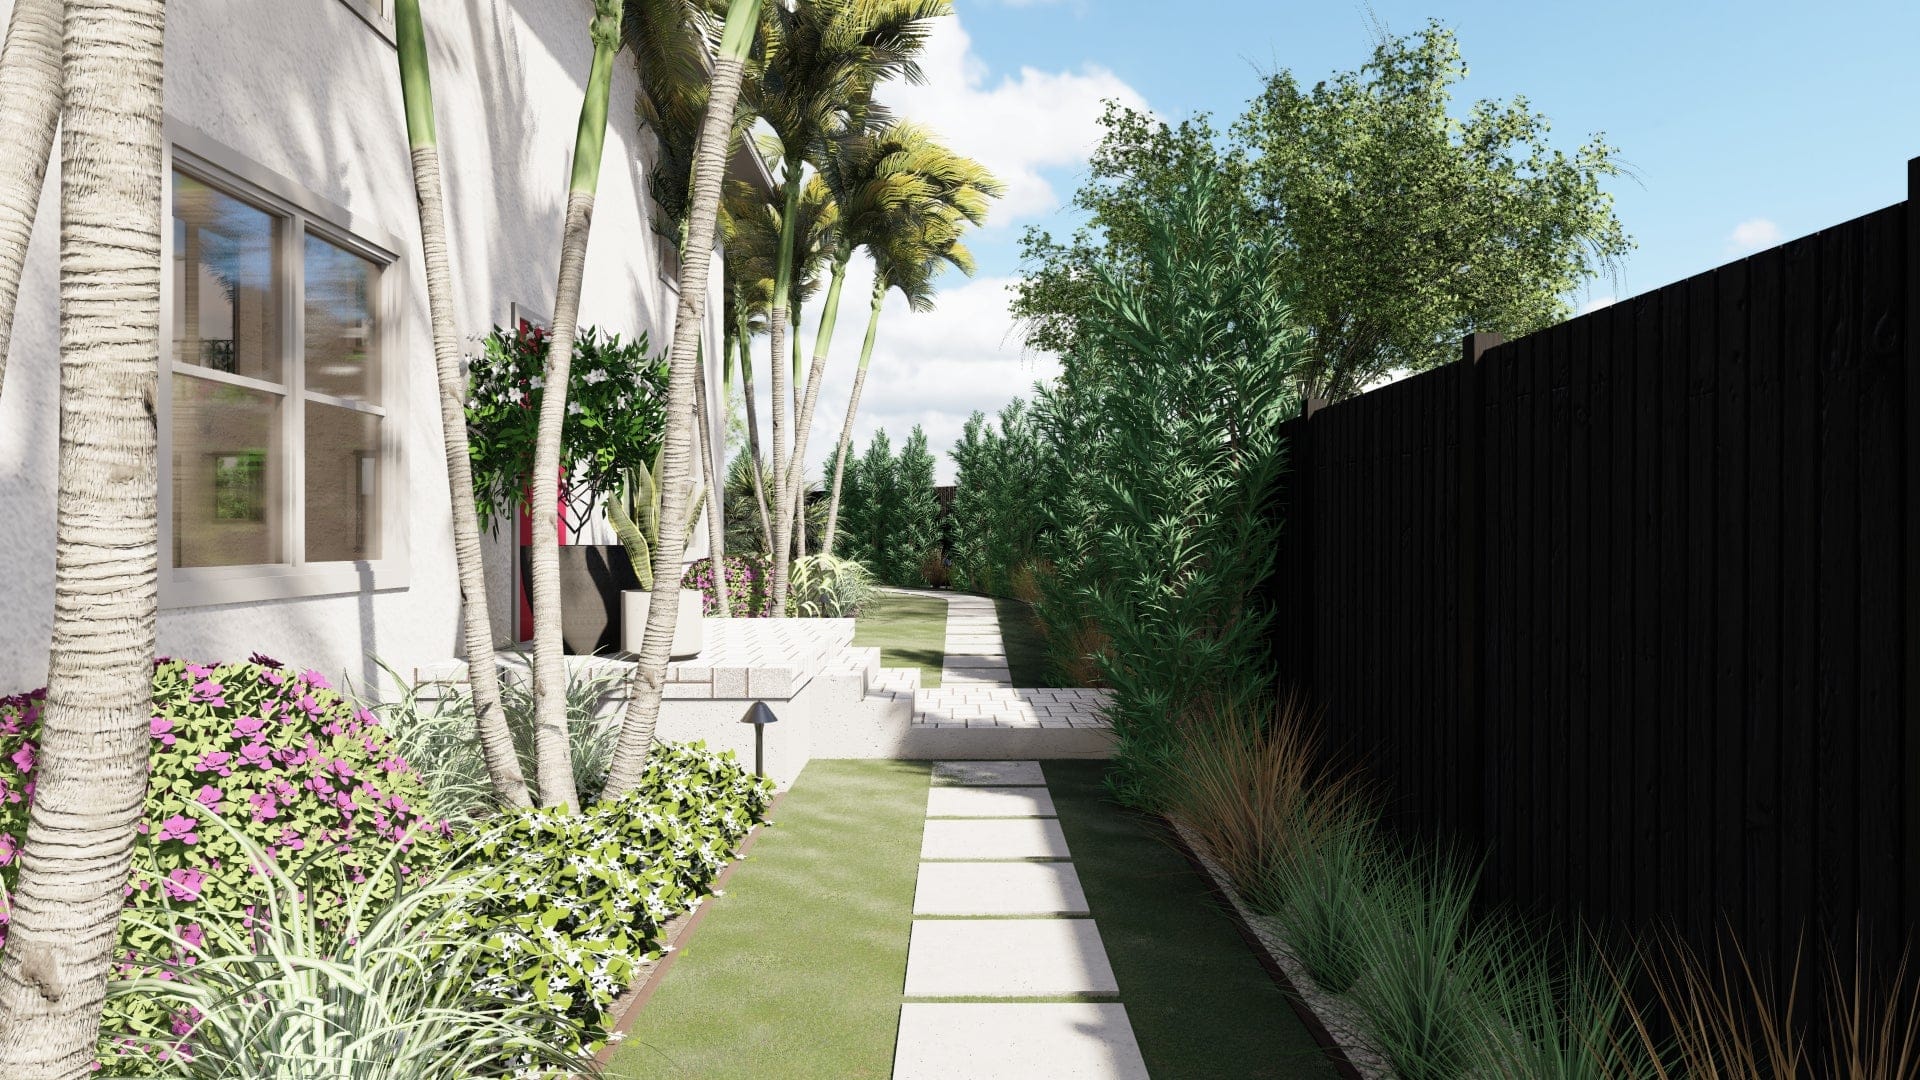 3D design render of side yard with stepper path and tropical planting beds